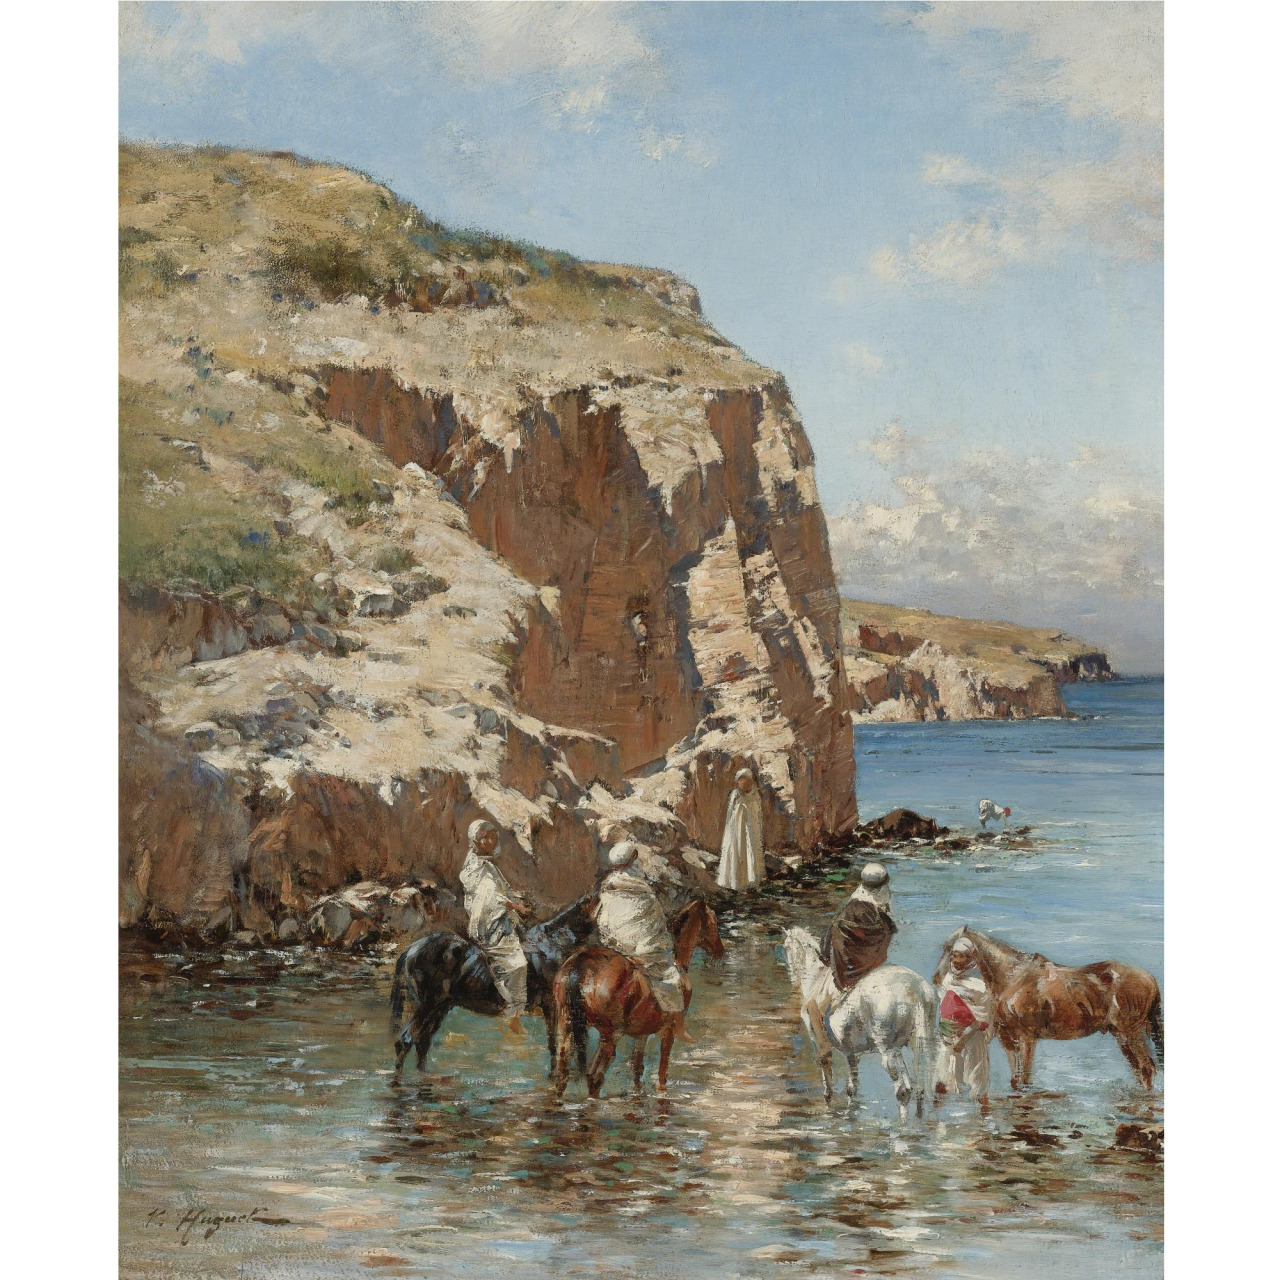 Victor-Pierre Huguet
REST AT THE WATER’S EDGE
signed V. Huguet (lower left)
oil on panel
18 by 14 ¾ in.
45.7 by 37.5 cm